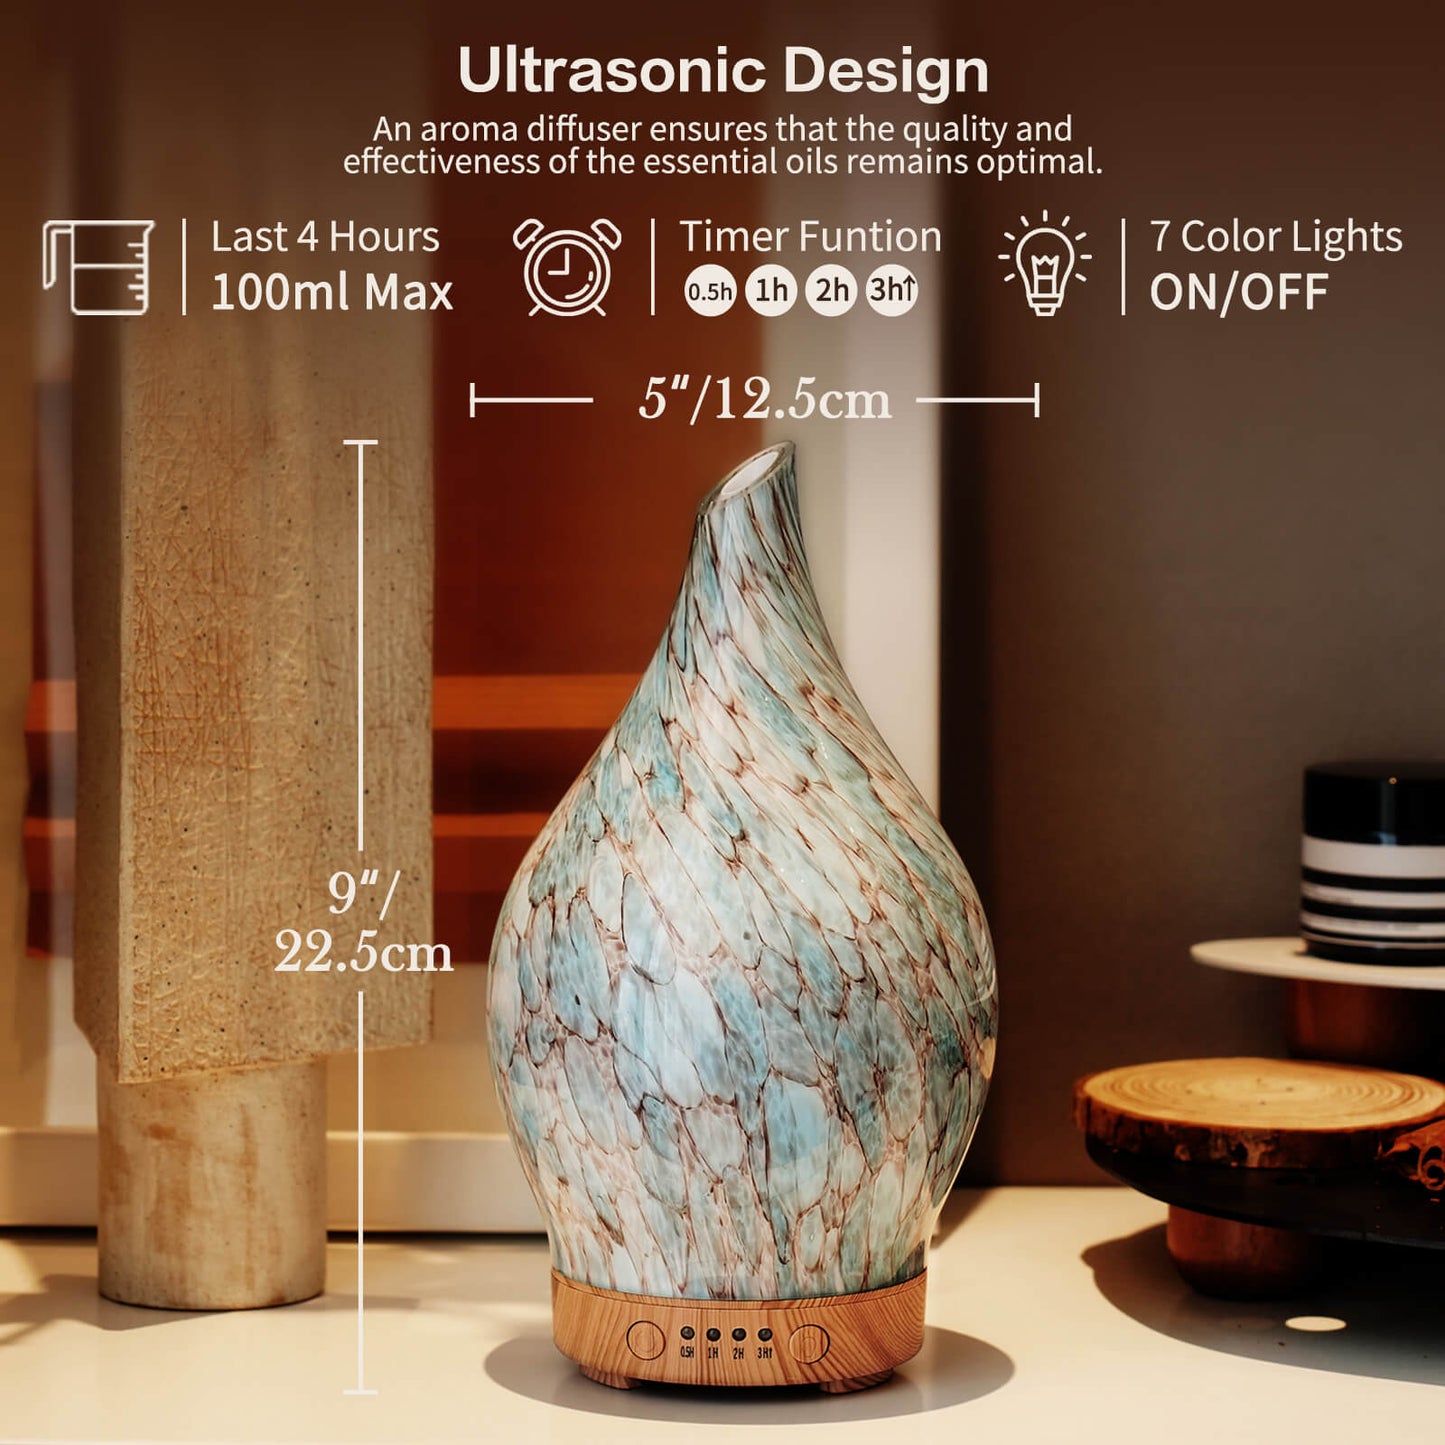 Porseme 100ml Glass Essential Oil Diffuser Aromatherapy Ultrasonic Cool Mist Humidifier 4 Running Hours Waterless Auto-Off Air Diffusers for Sleeping,Yoga,Office Working Spa and Rest (Light Blue)